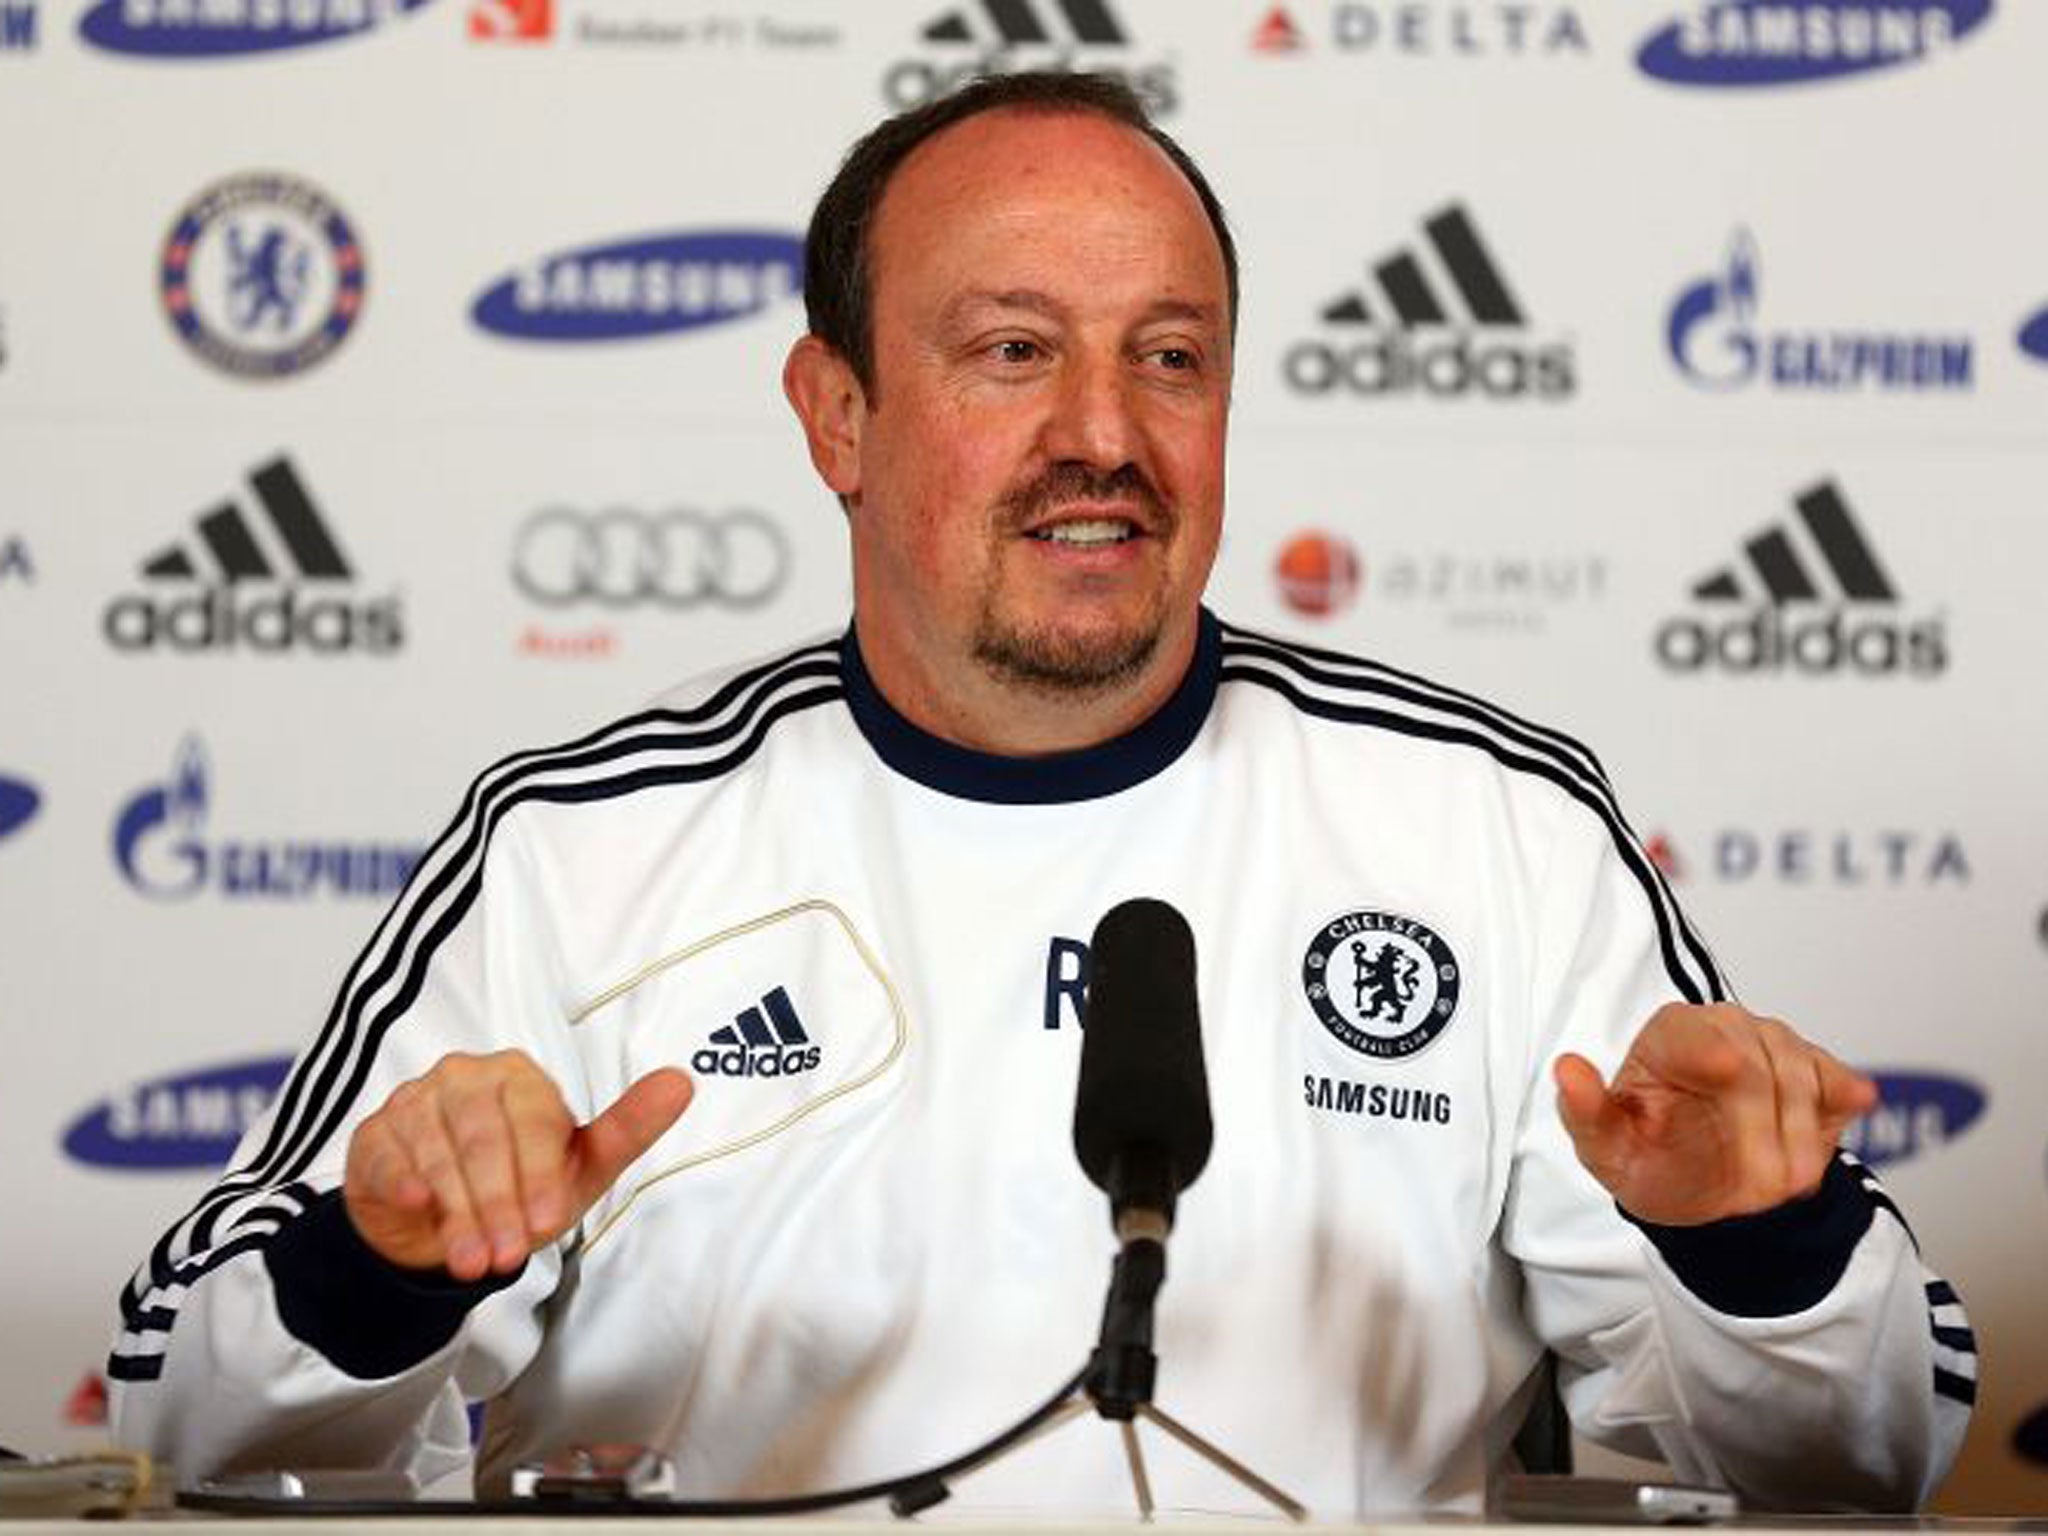 Rafael Benitez repeated the phrase that the Chelsea fans and players must ‘stick together’